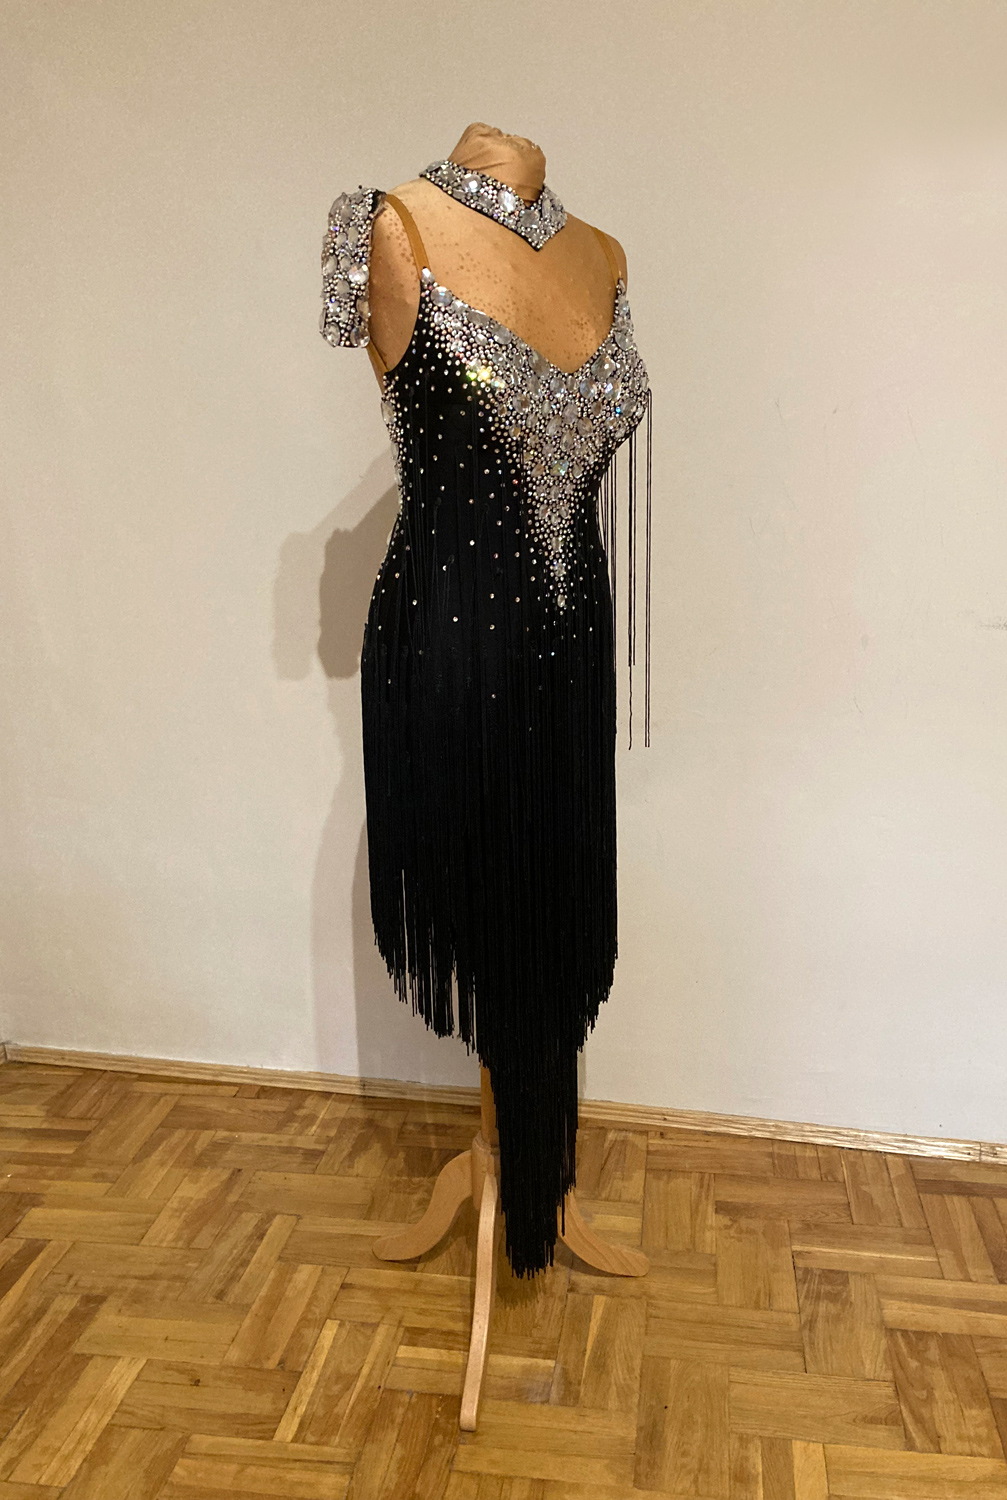 M465 Black Silver Latin Dance Dress for sale - Dreamgown